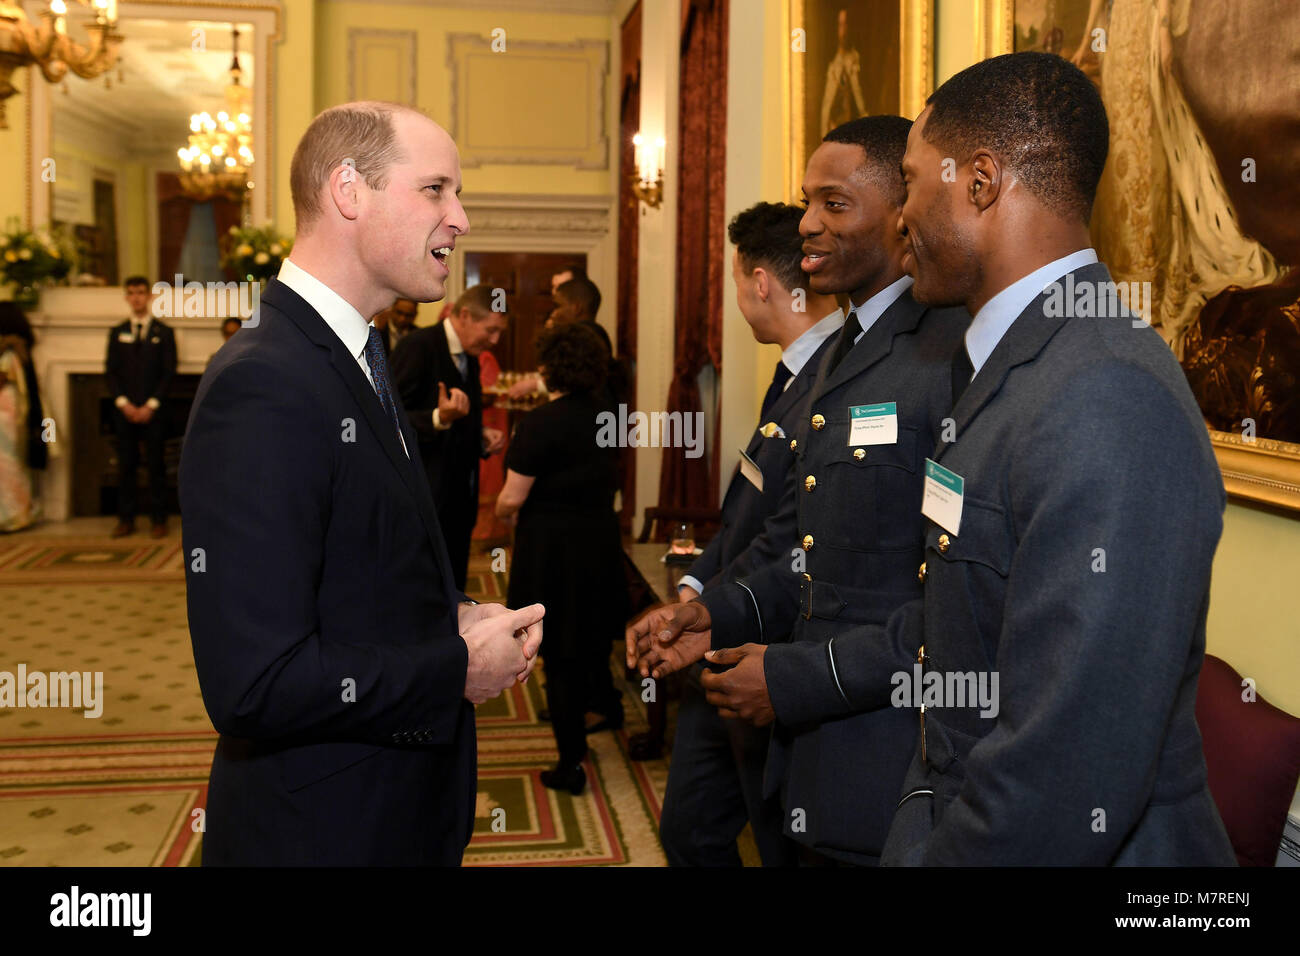 The Duke of Cambridge meets guests at a reception held by the Commonwealth Secretary-General, Rt Hon Patricia Scotland QC, at Marlborough House, the home of the Commonwealth Secretariat in London. Stock Photo